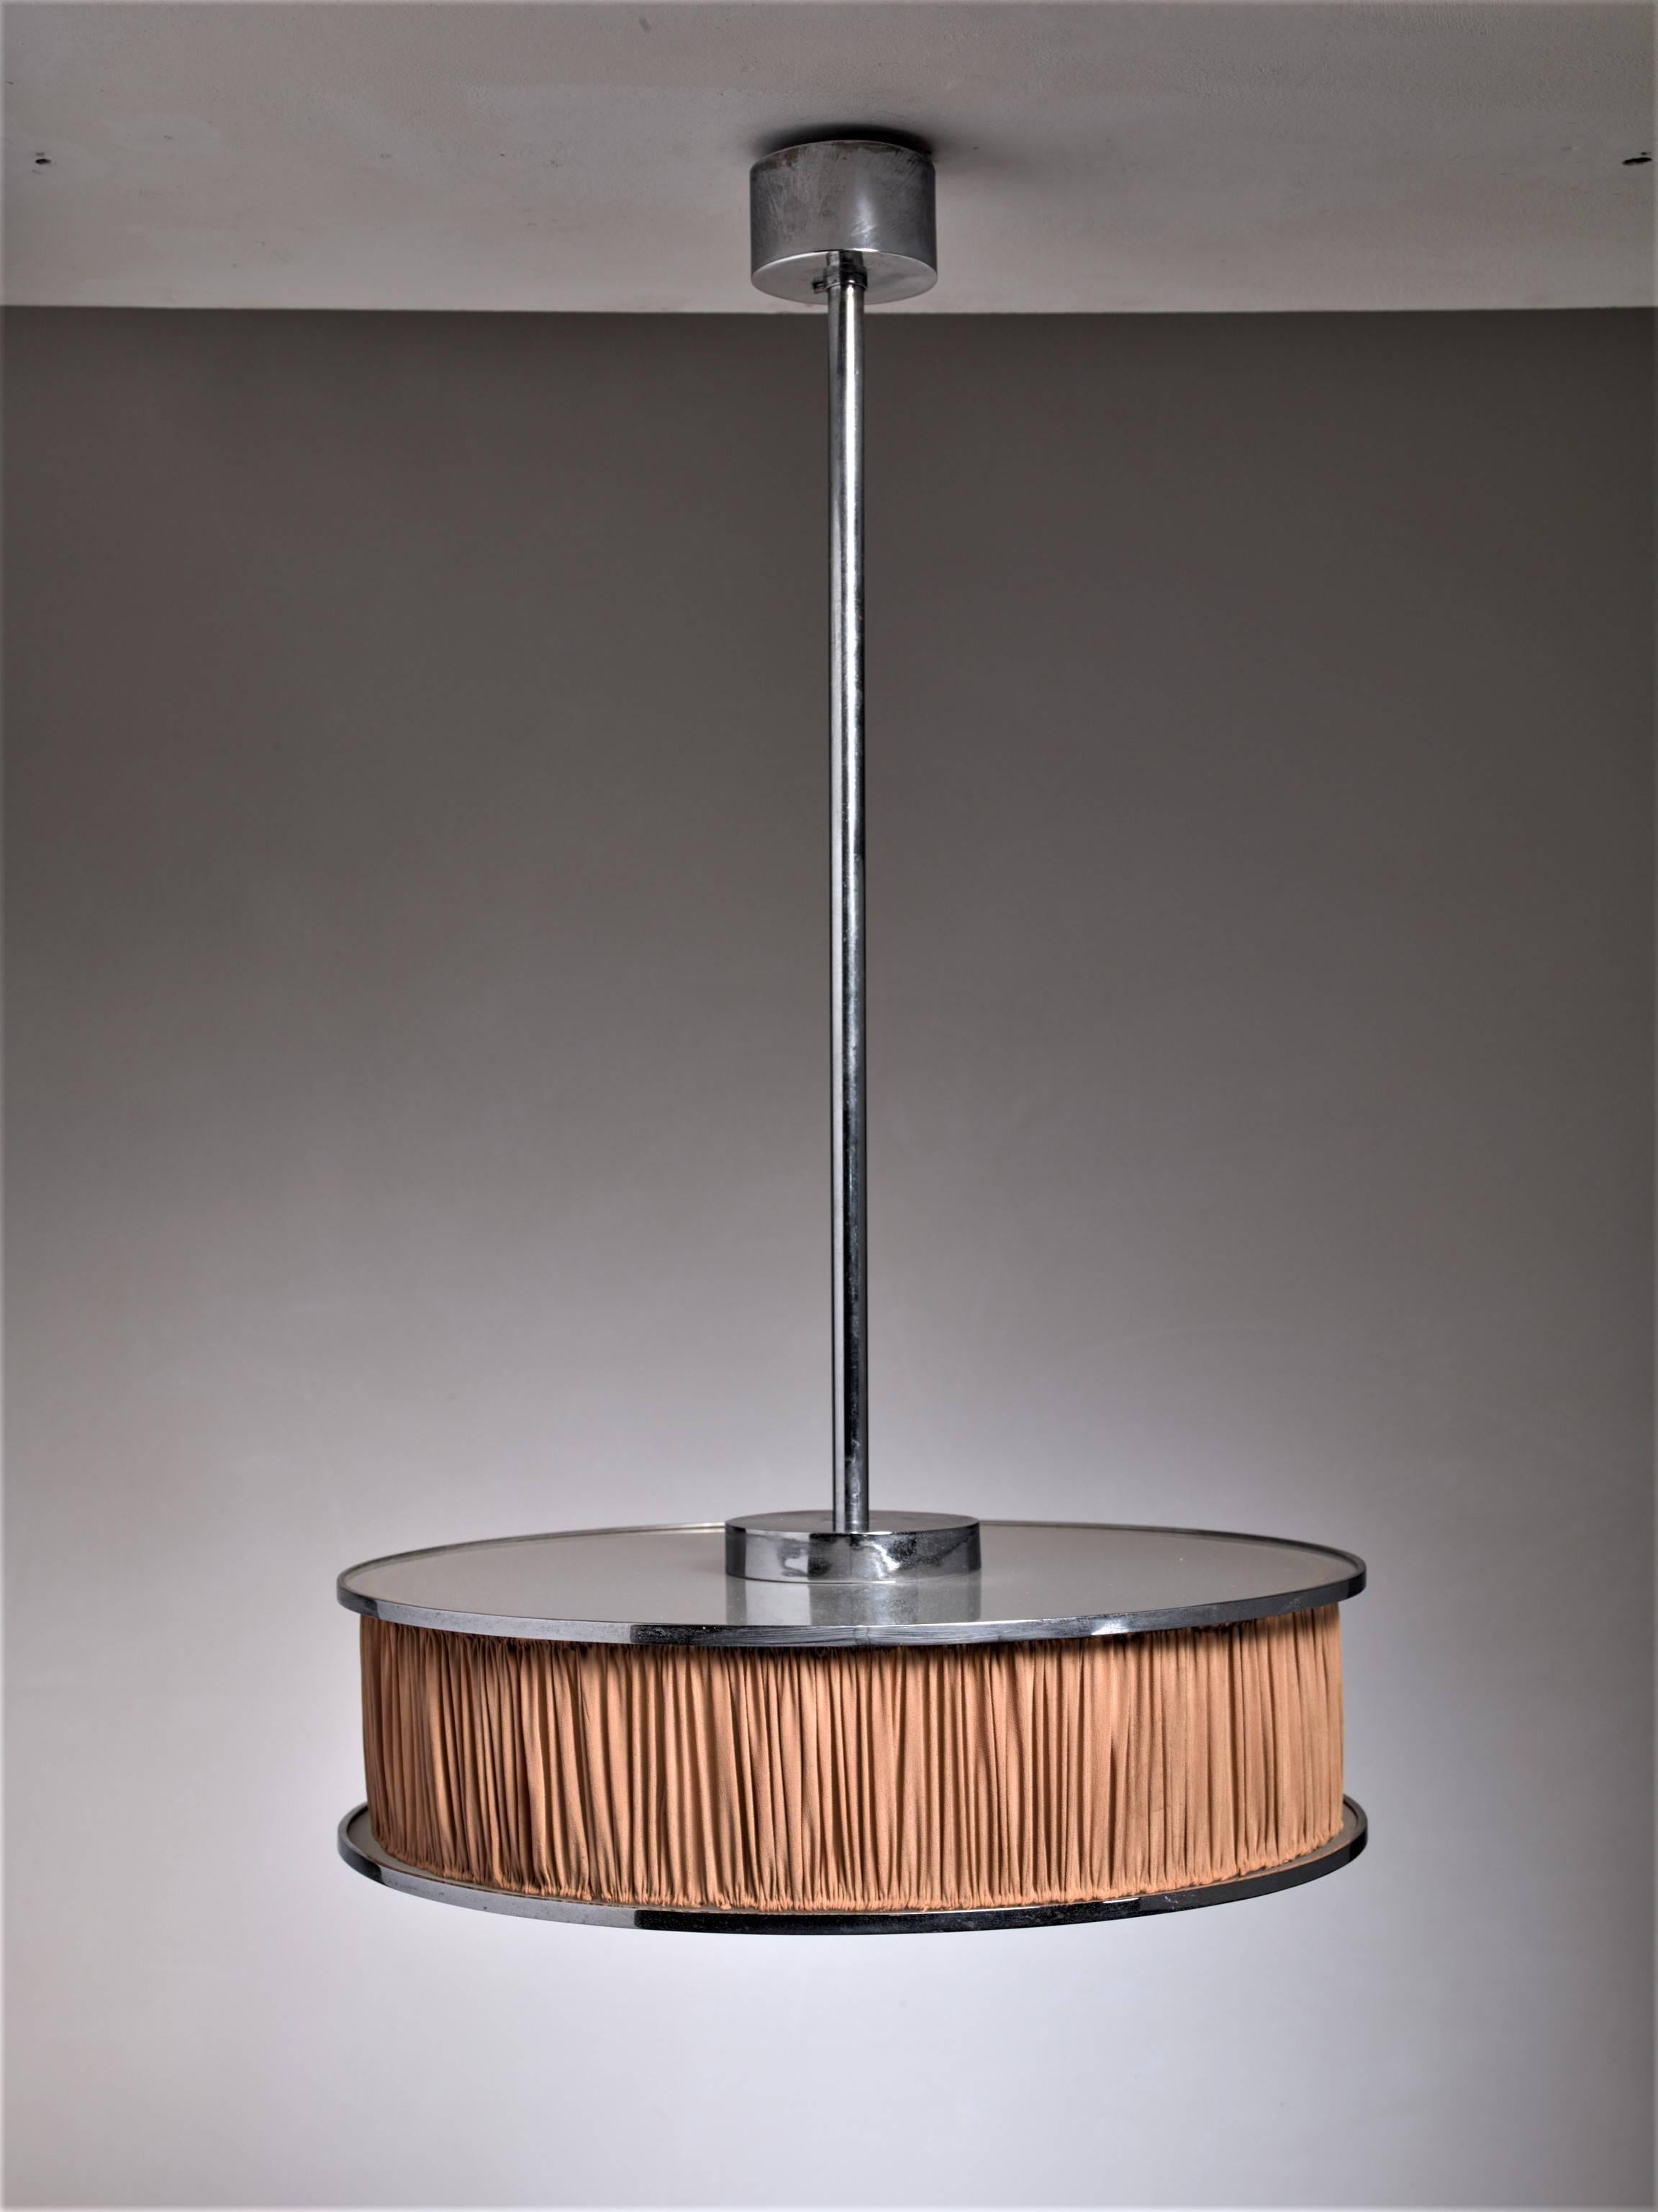 Frosted Large Italian Modernist Pendant Lamp, 1920s